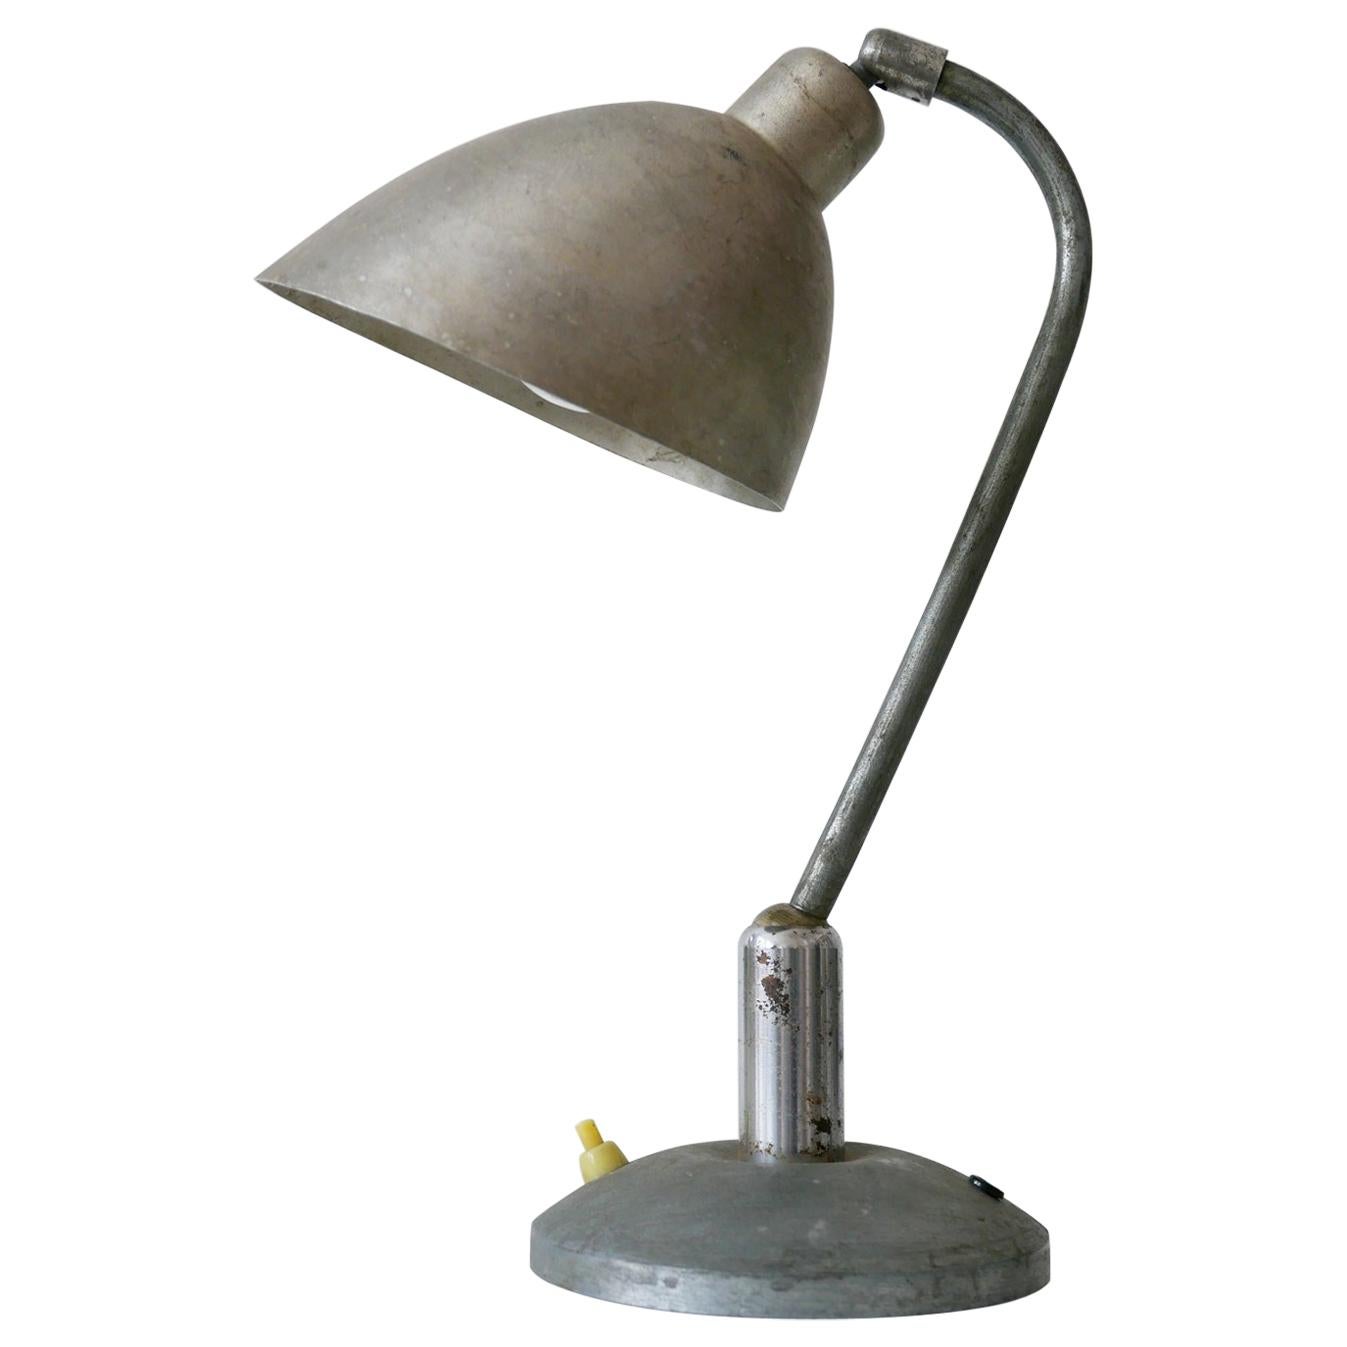 Rare Czech Functionalist or Bauhaus Table Lamp by Franta ‘Frantisek’ Anyz, 1920s For Sale